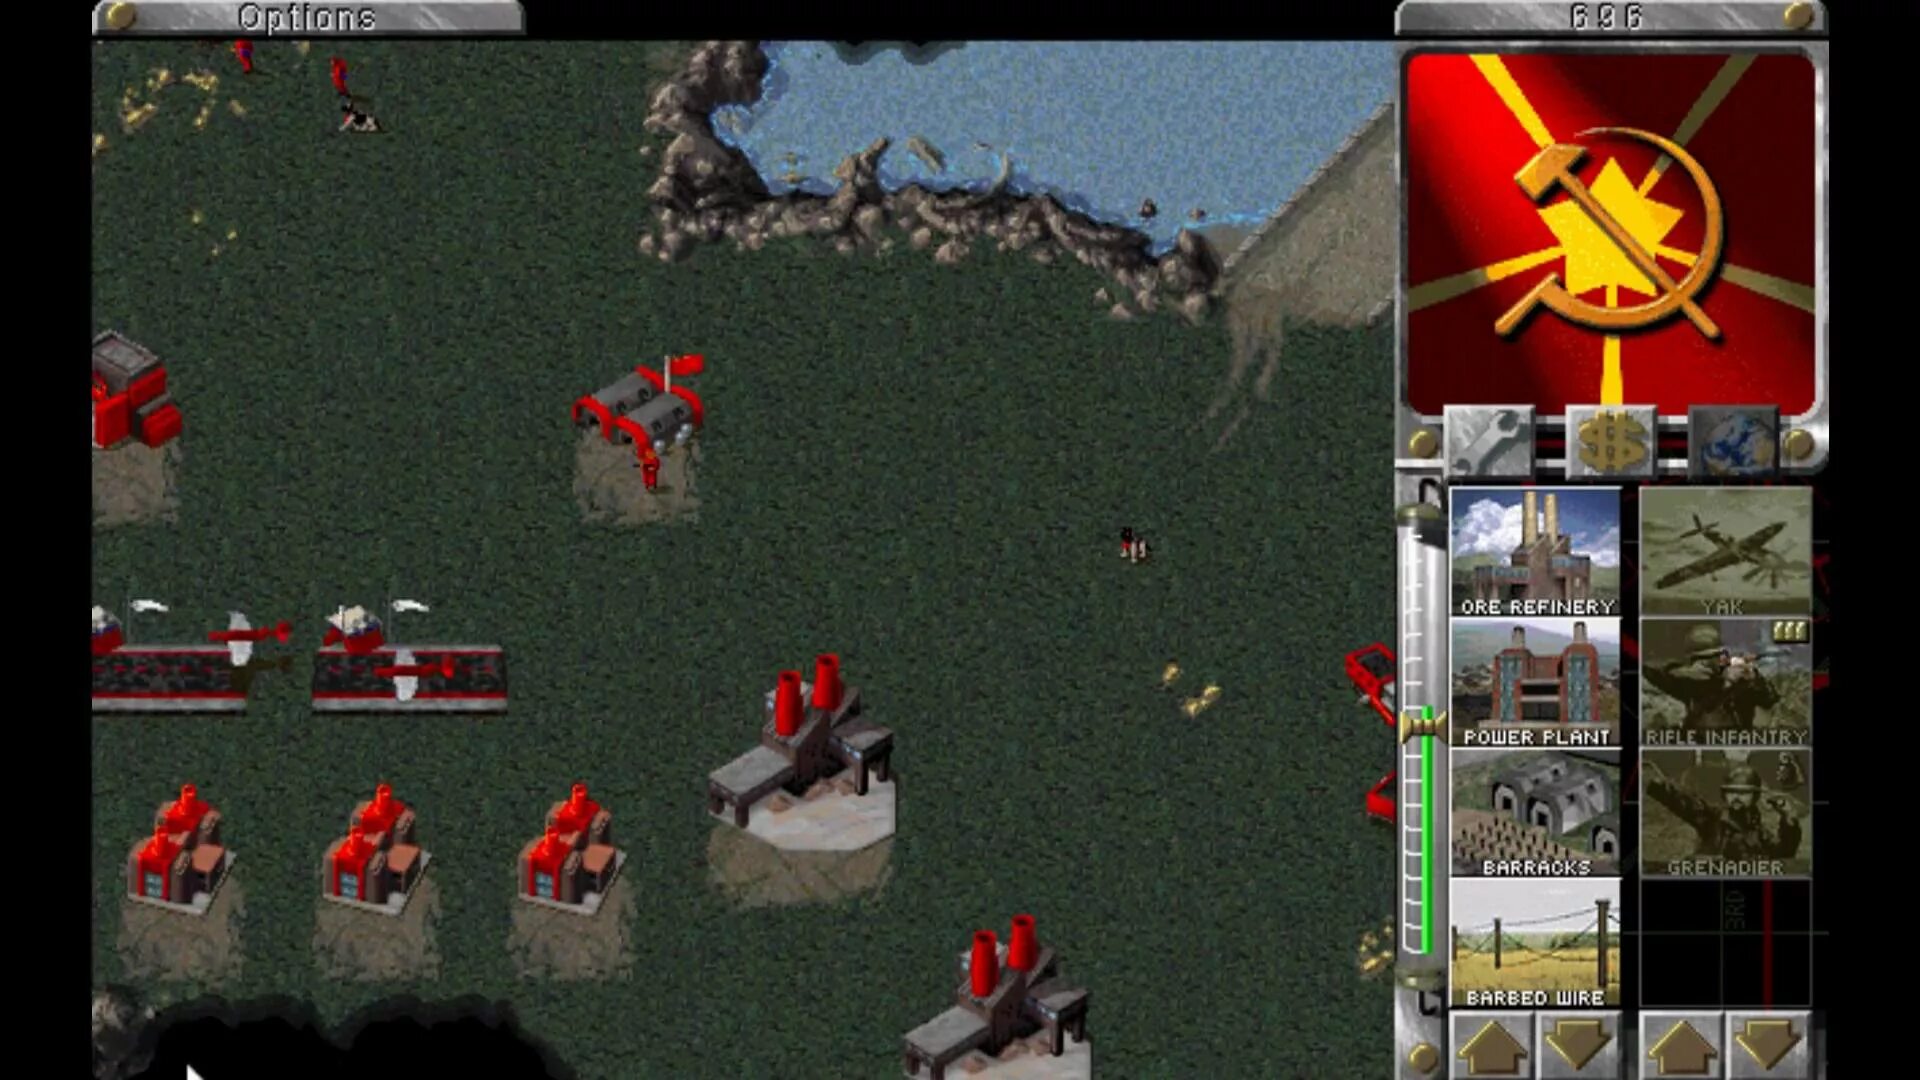 Игра Red Alert 1. Command and Conquer 1996. Стратегия Red Alert 1. Command Conquer Red Alert 1996.